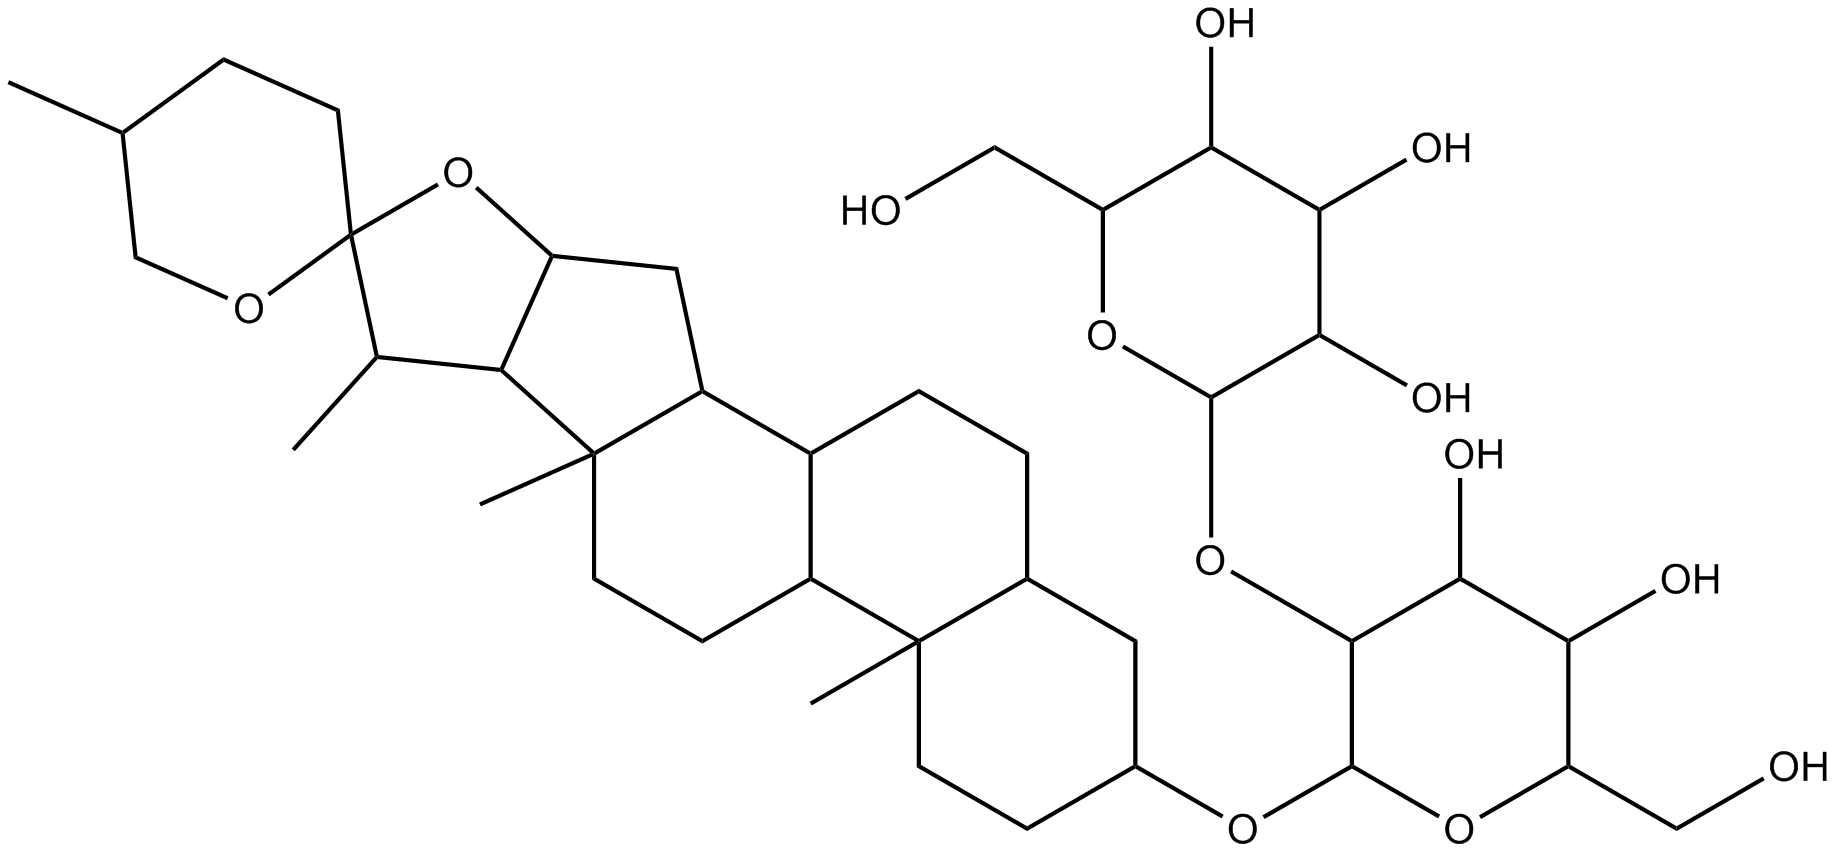 Timosaponin A3  Chemical Structure